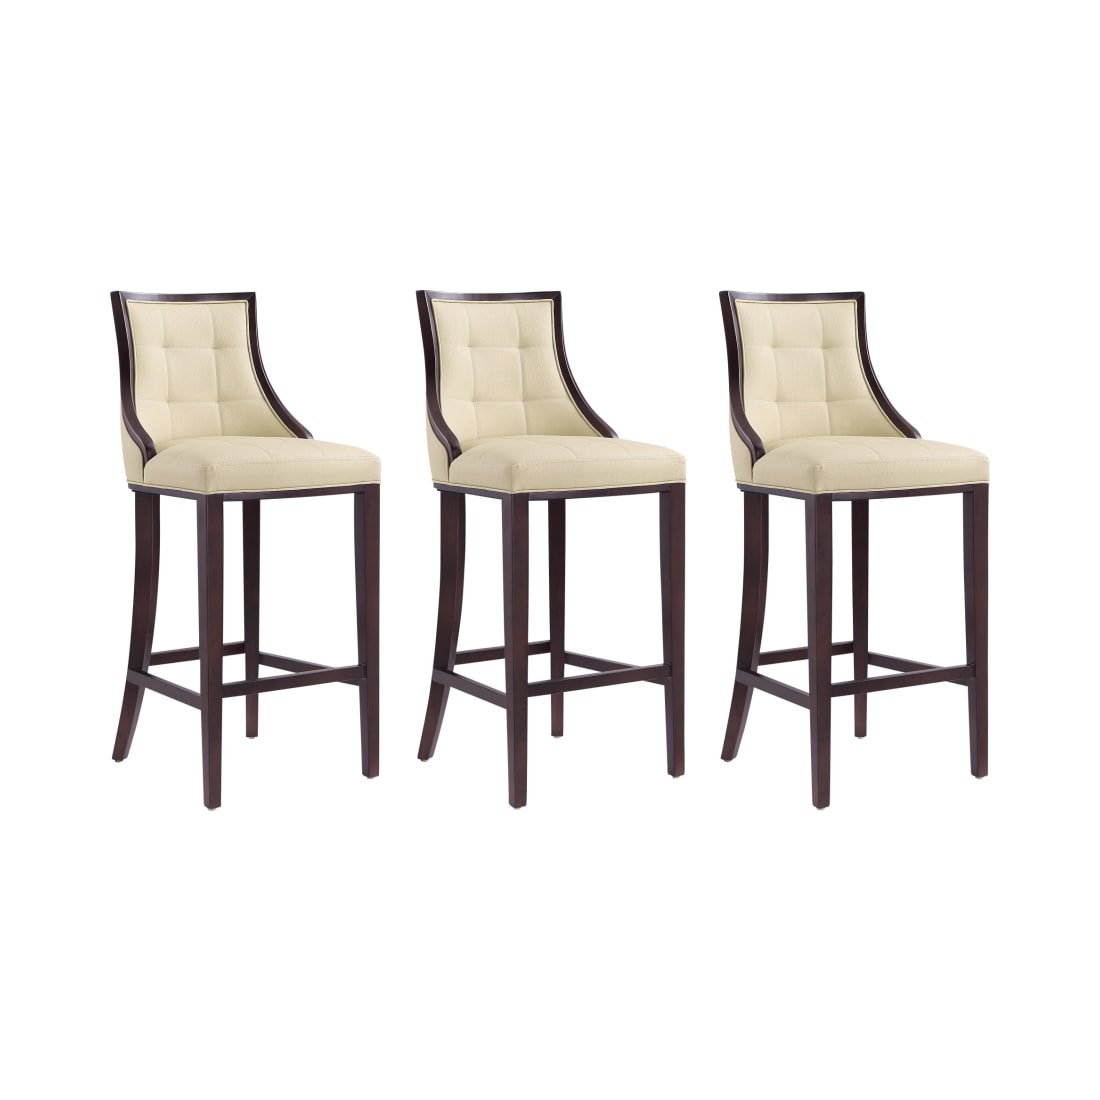 Fifth Avenue Bar Stool in Cream and Walnut (Set of 3)